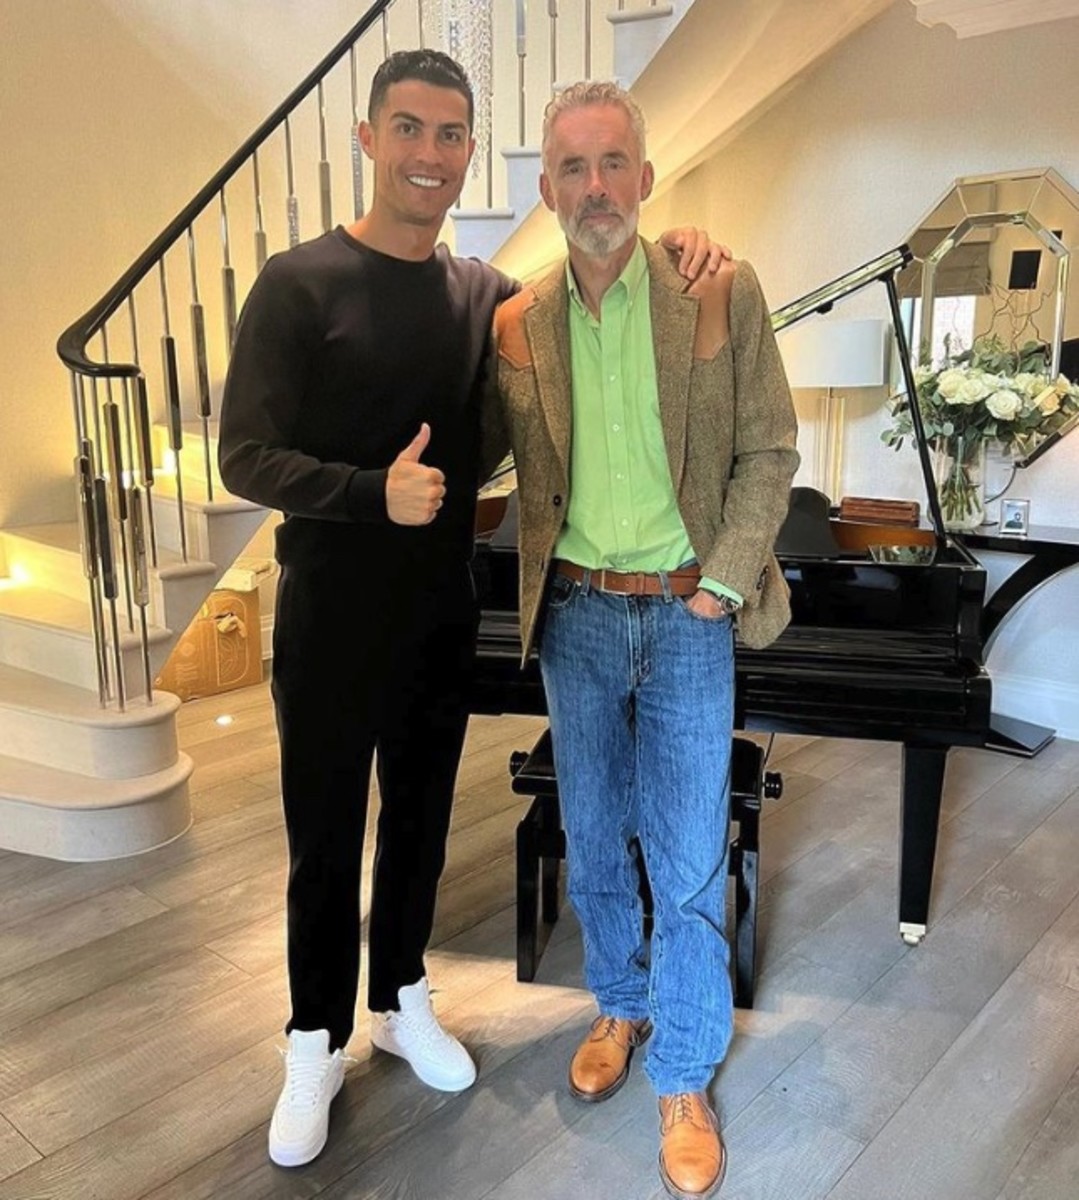 Cristiano Ronaldo (left) pictured with Jordan Peterson in September 2022